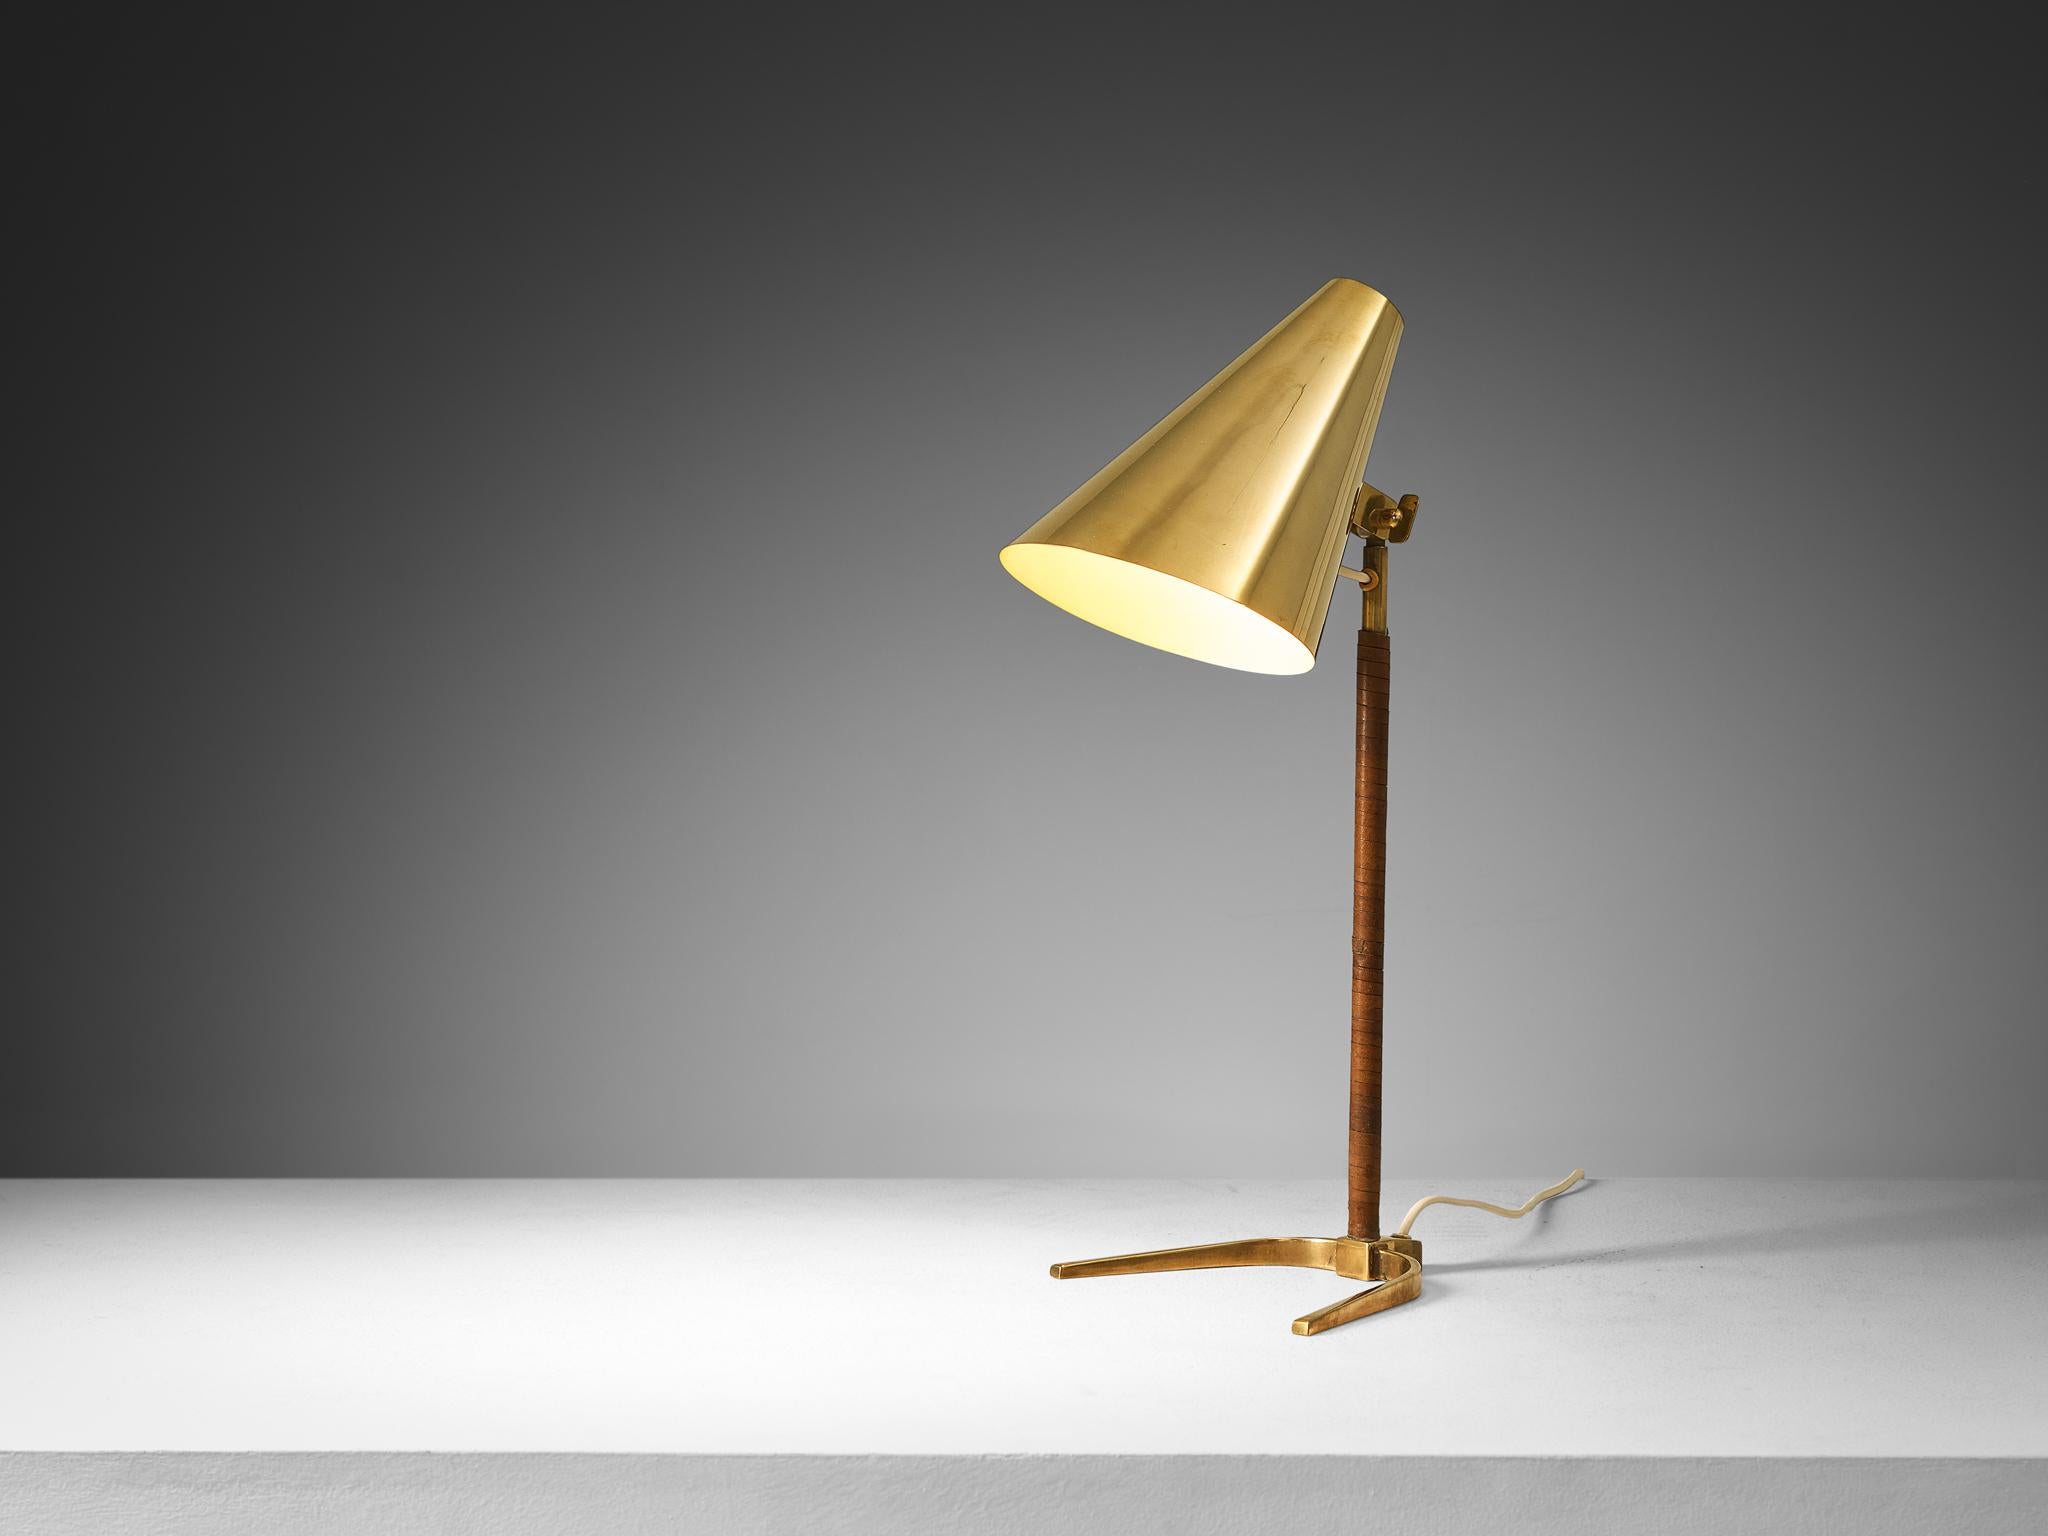 Paavo Tynell for Taito Oy, table lamp, model ‘9225’, brass, leather, Finland, 1950s

This '9225' desk lamp, designed by the master of lighting Paavo Tynell in the fifties, stands as a truly remarkable piece. This item is quite rare due to its